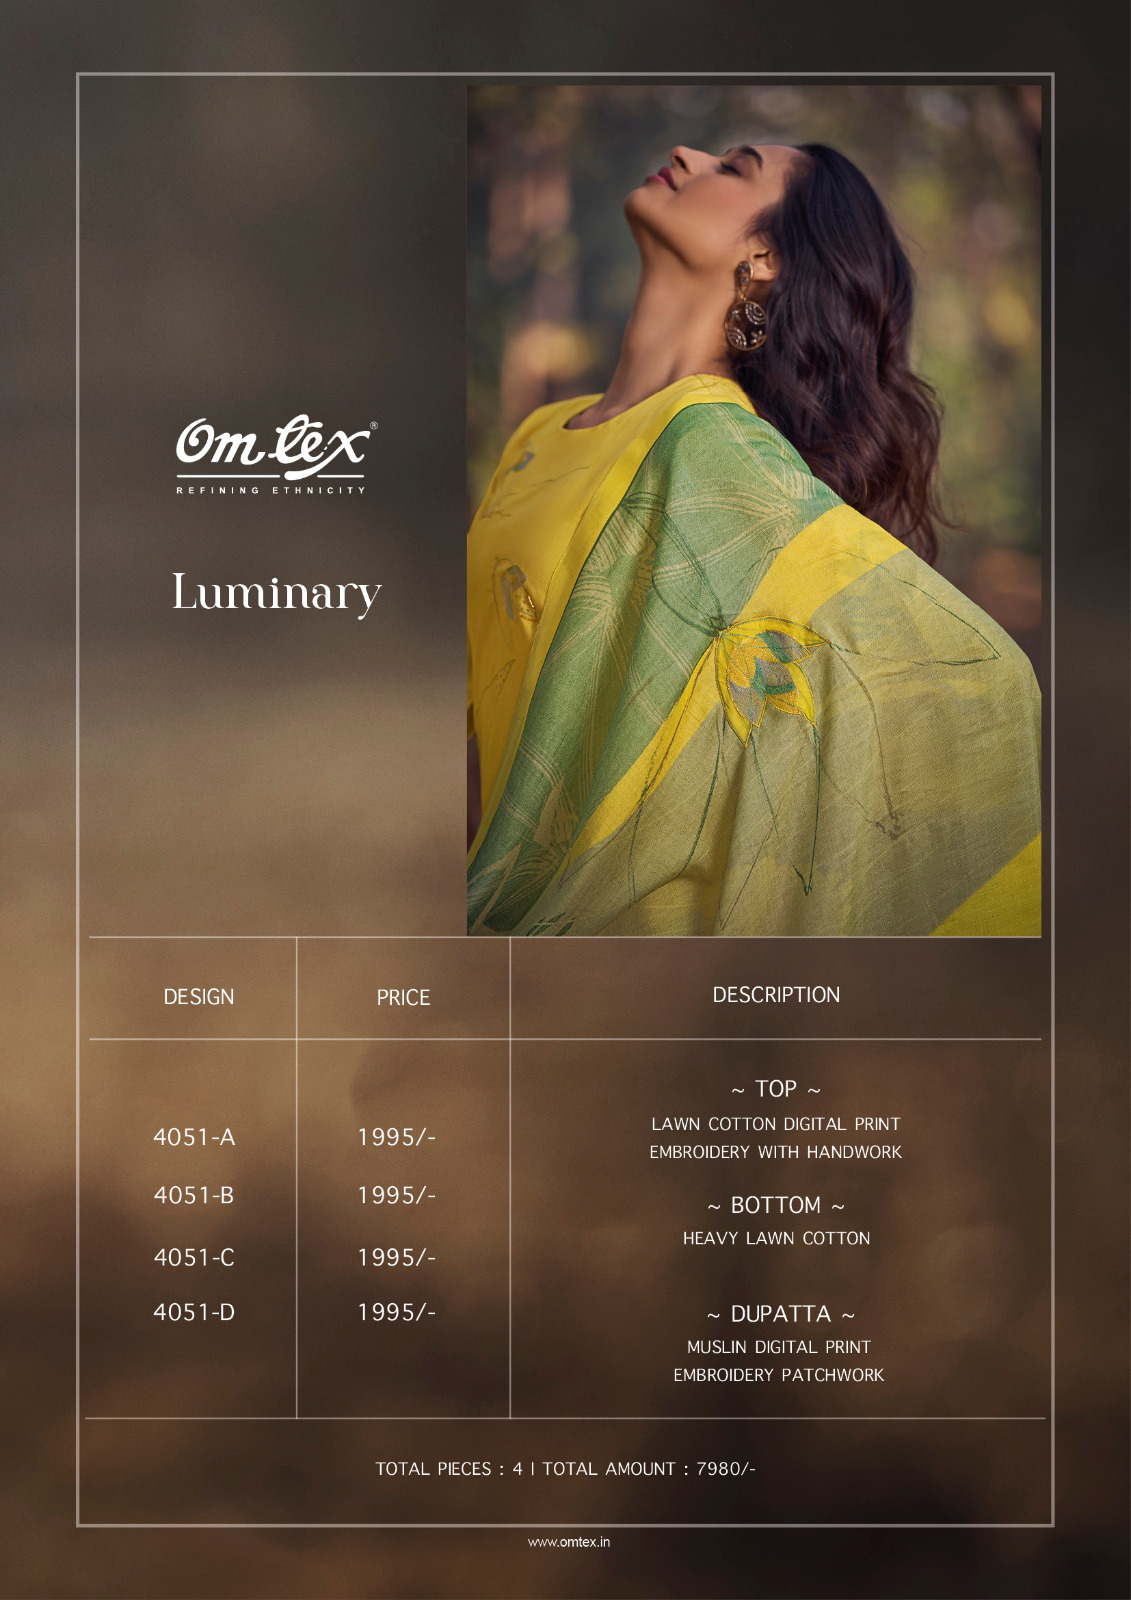 Omtex Luminary collection 2